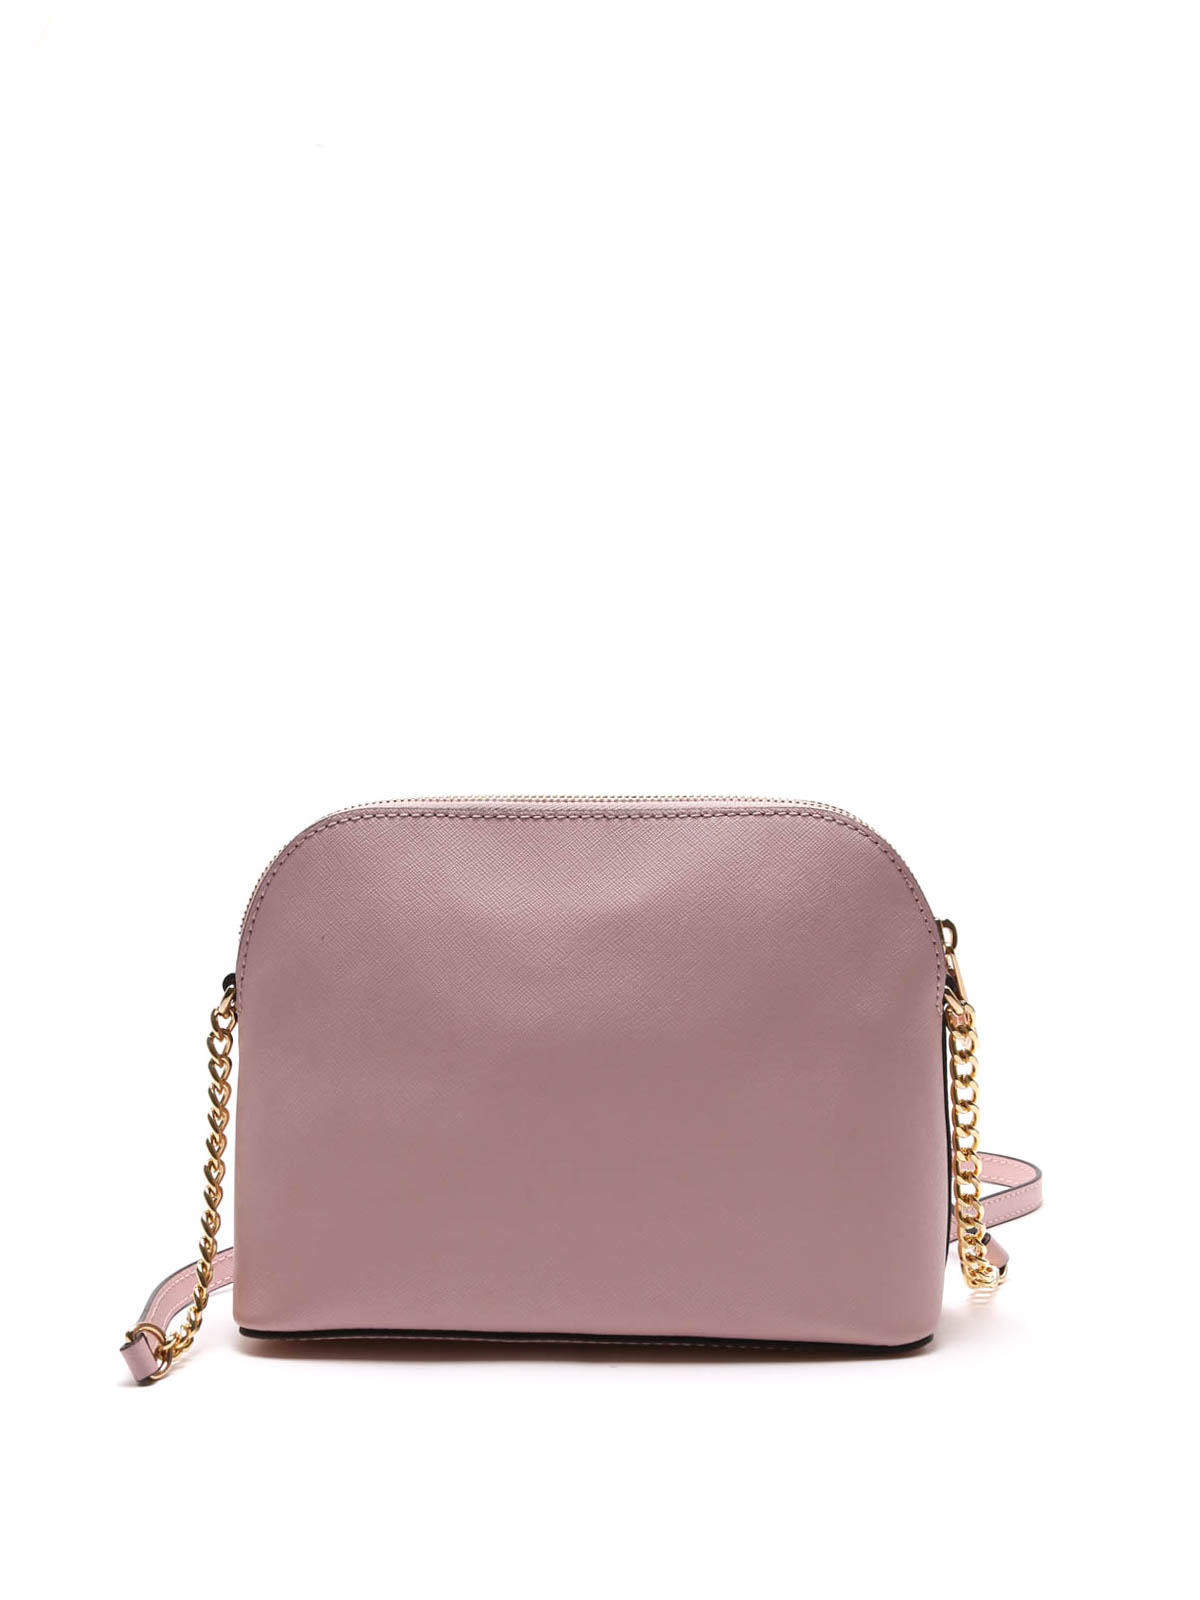 Cindy Gold Leather Dome Cross-Body Bag